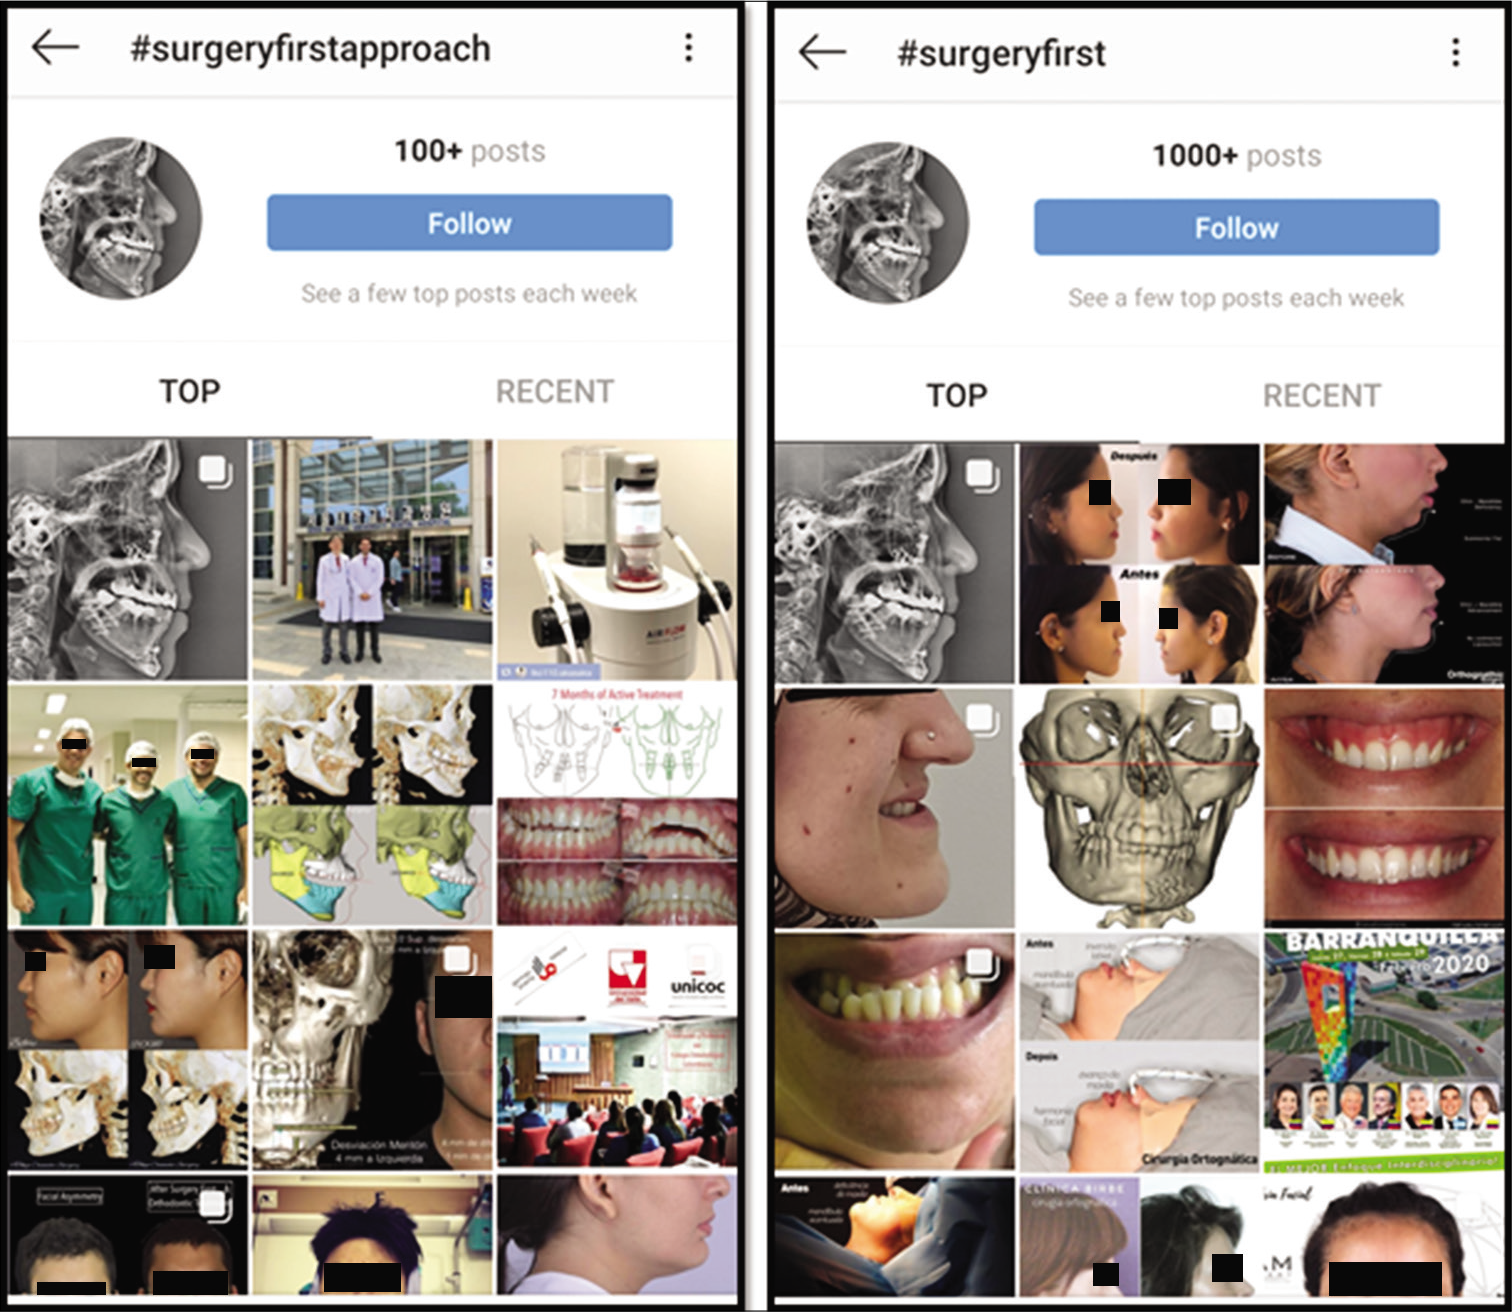 Results of the search terms #surgeryfirst and #surgeryfirstapproach on Instagram.